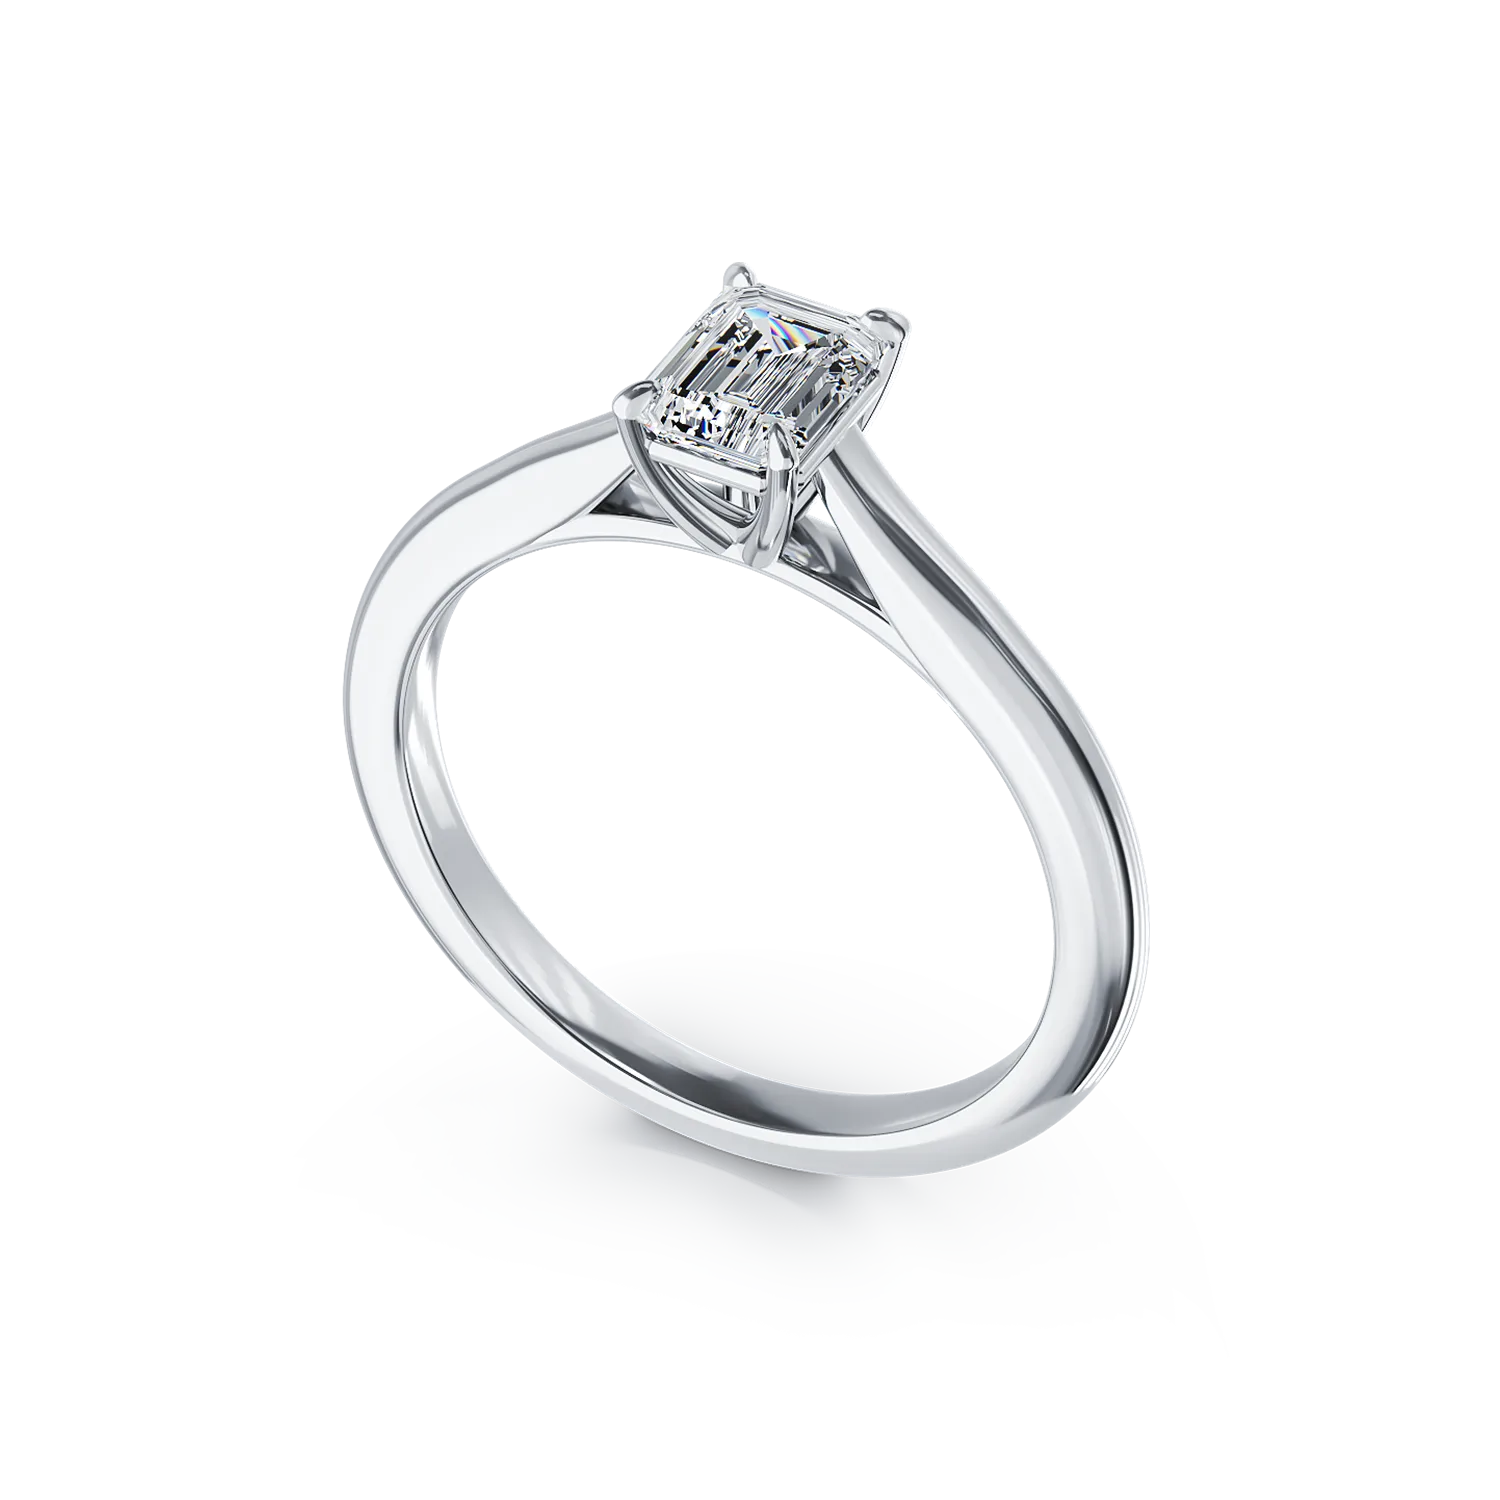 Platinum engagement ring with a 0.62ct solitaire diamond